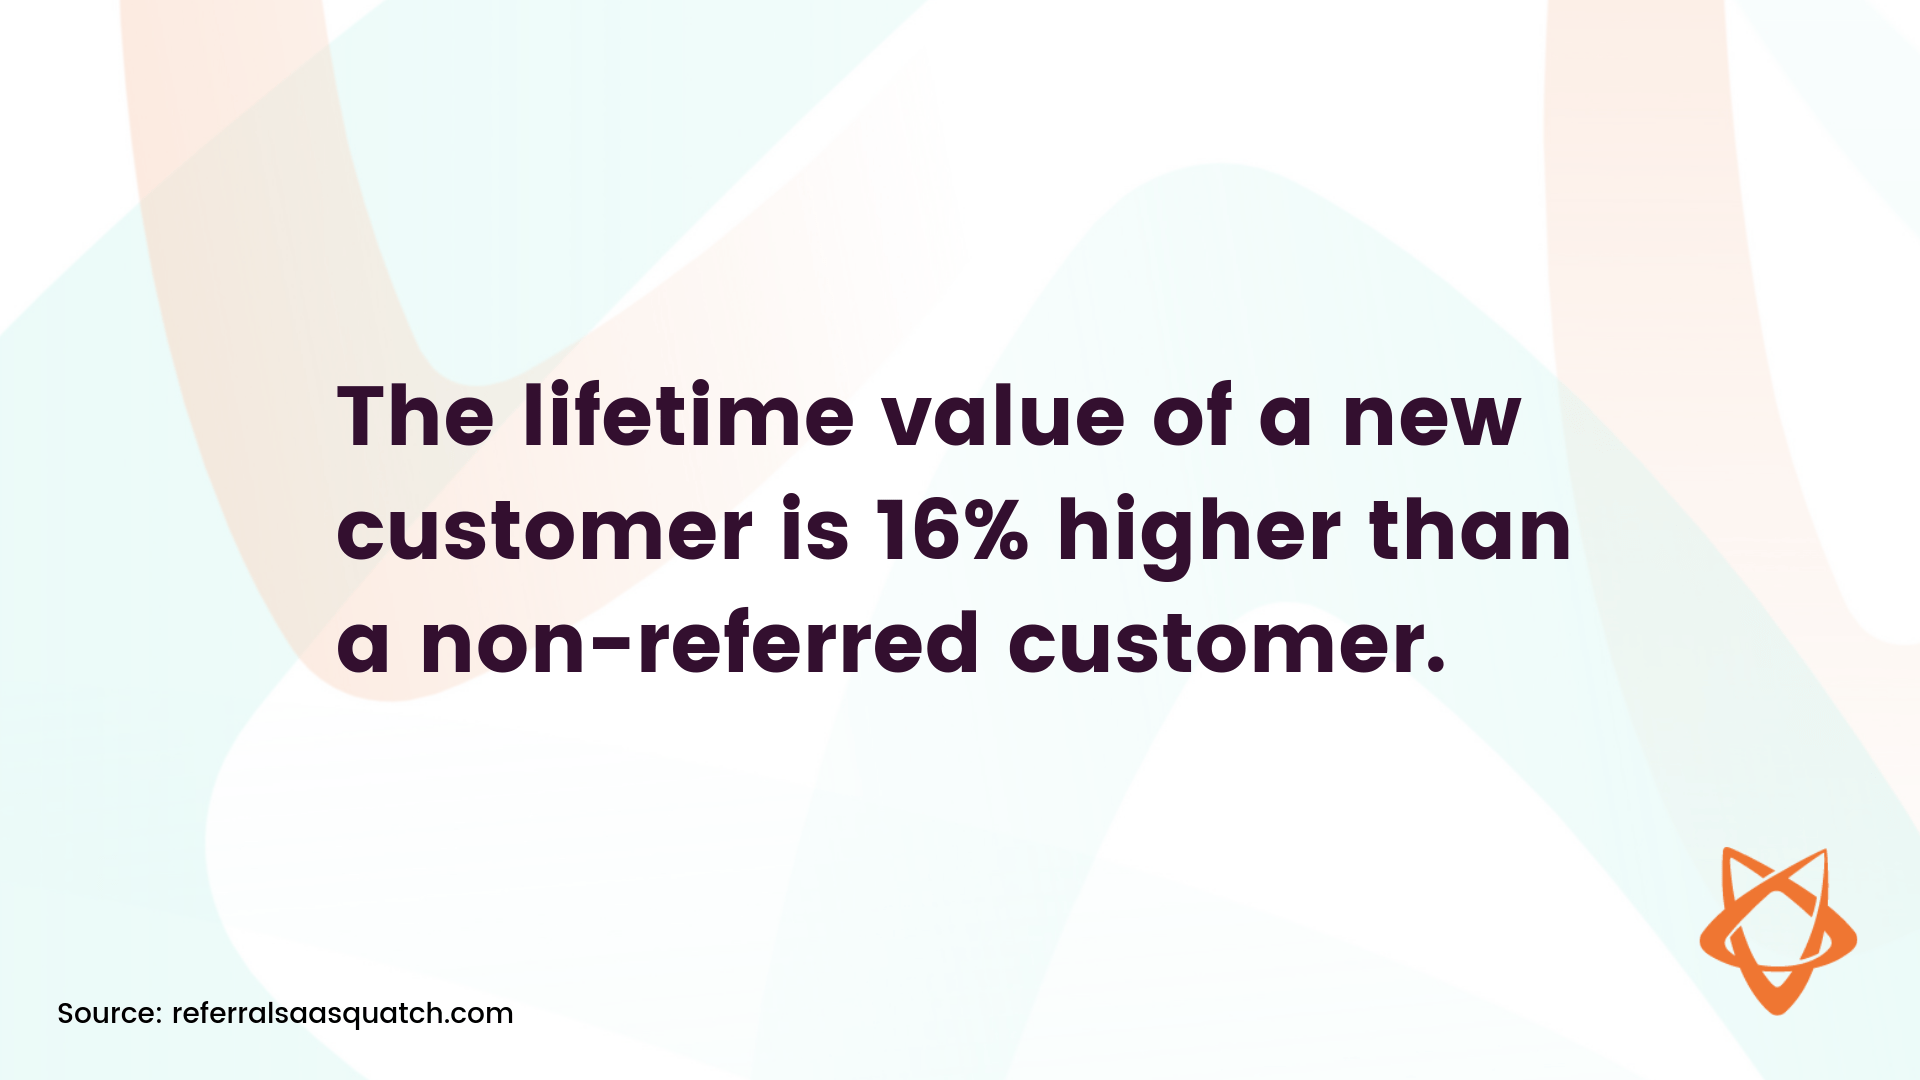 The lifetime value of a new customer is 16% higher than a non-referred customer